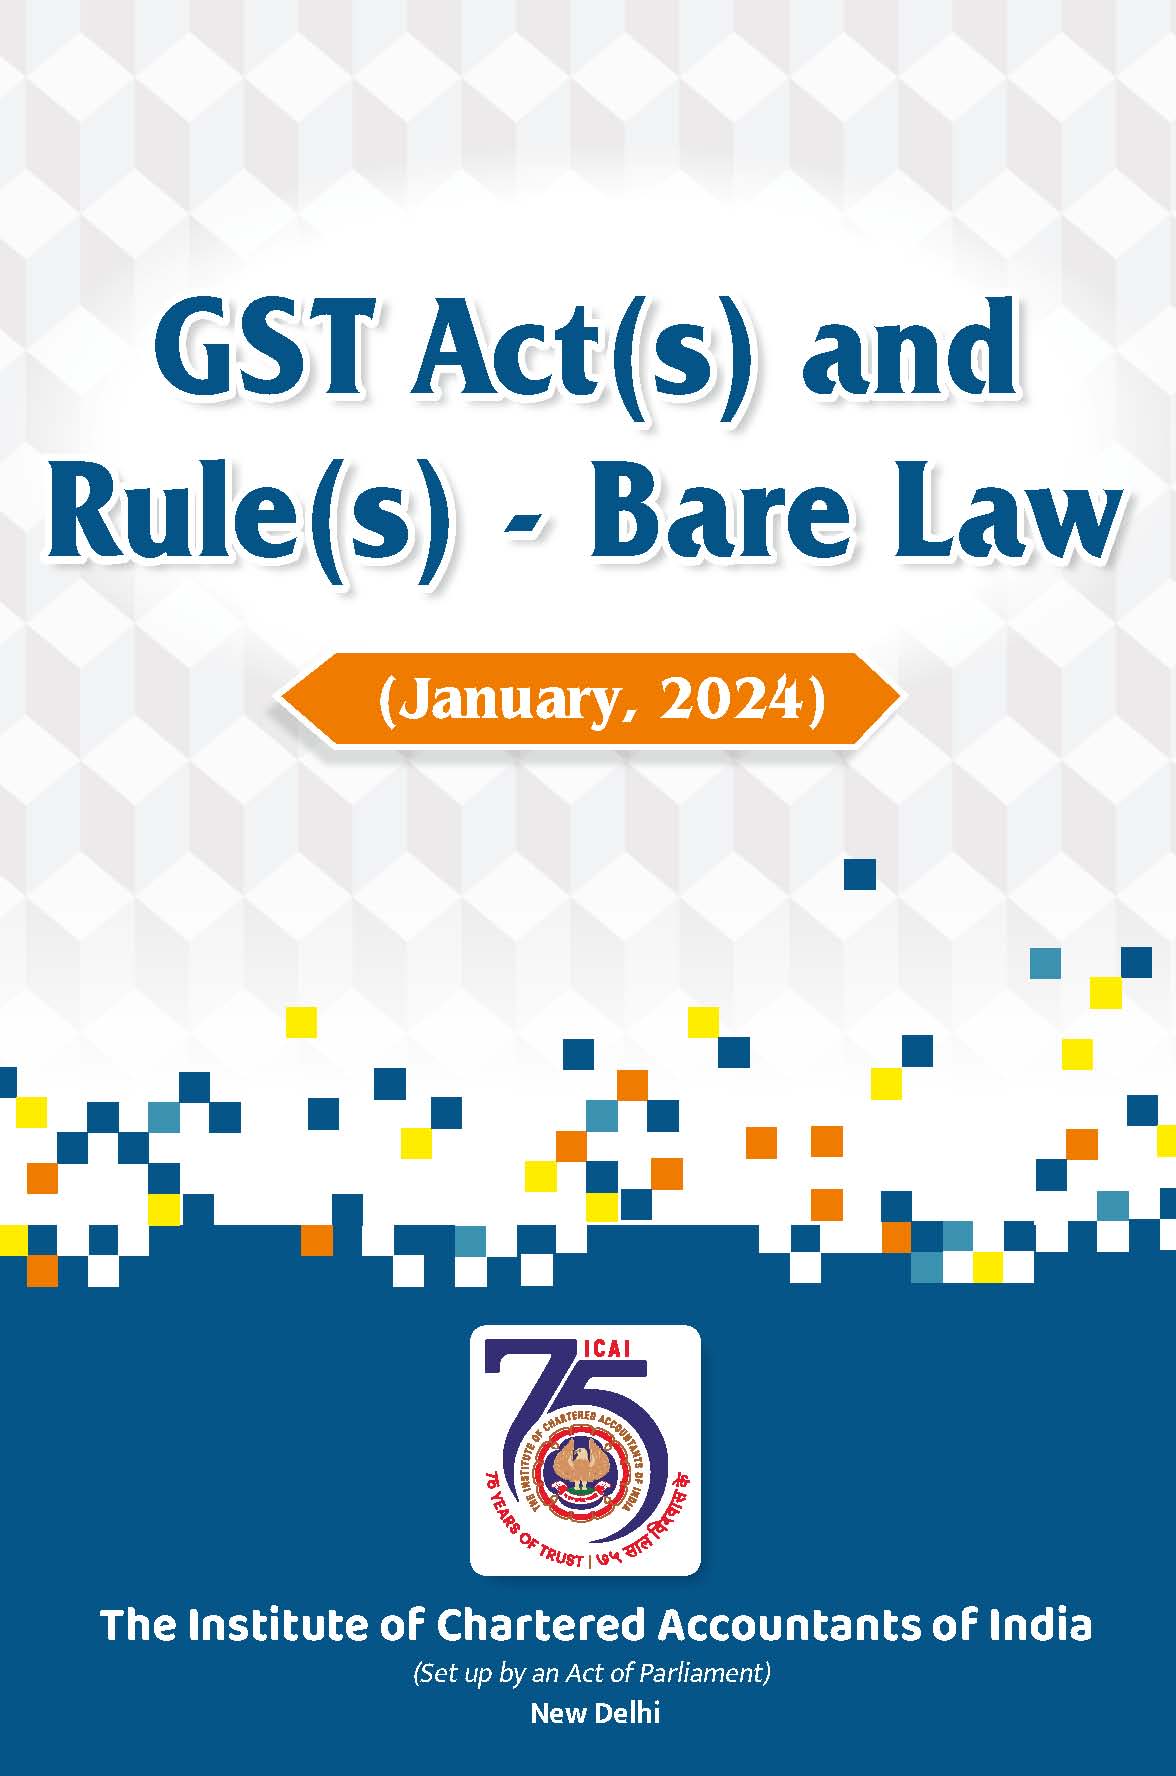 GST Act(s) and Rule(s)- Bare Law - 7th Edition - January, 2024